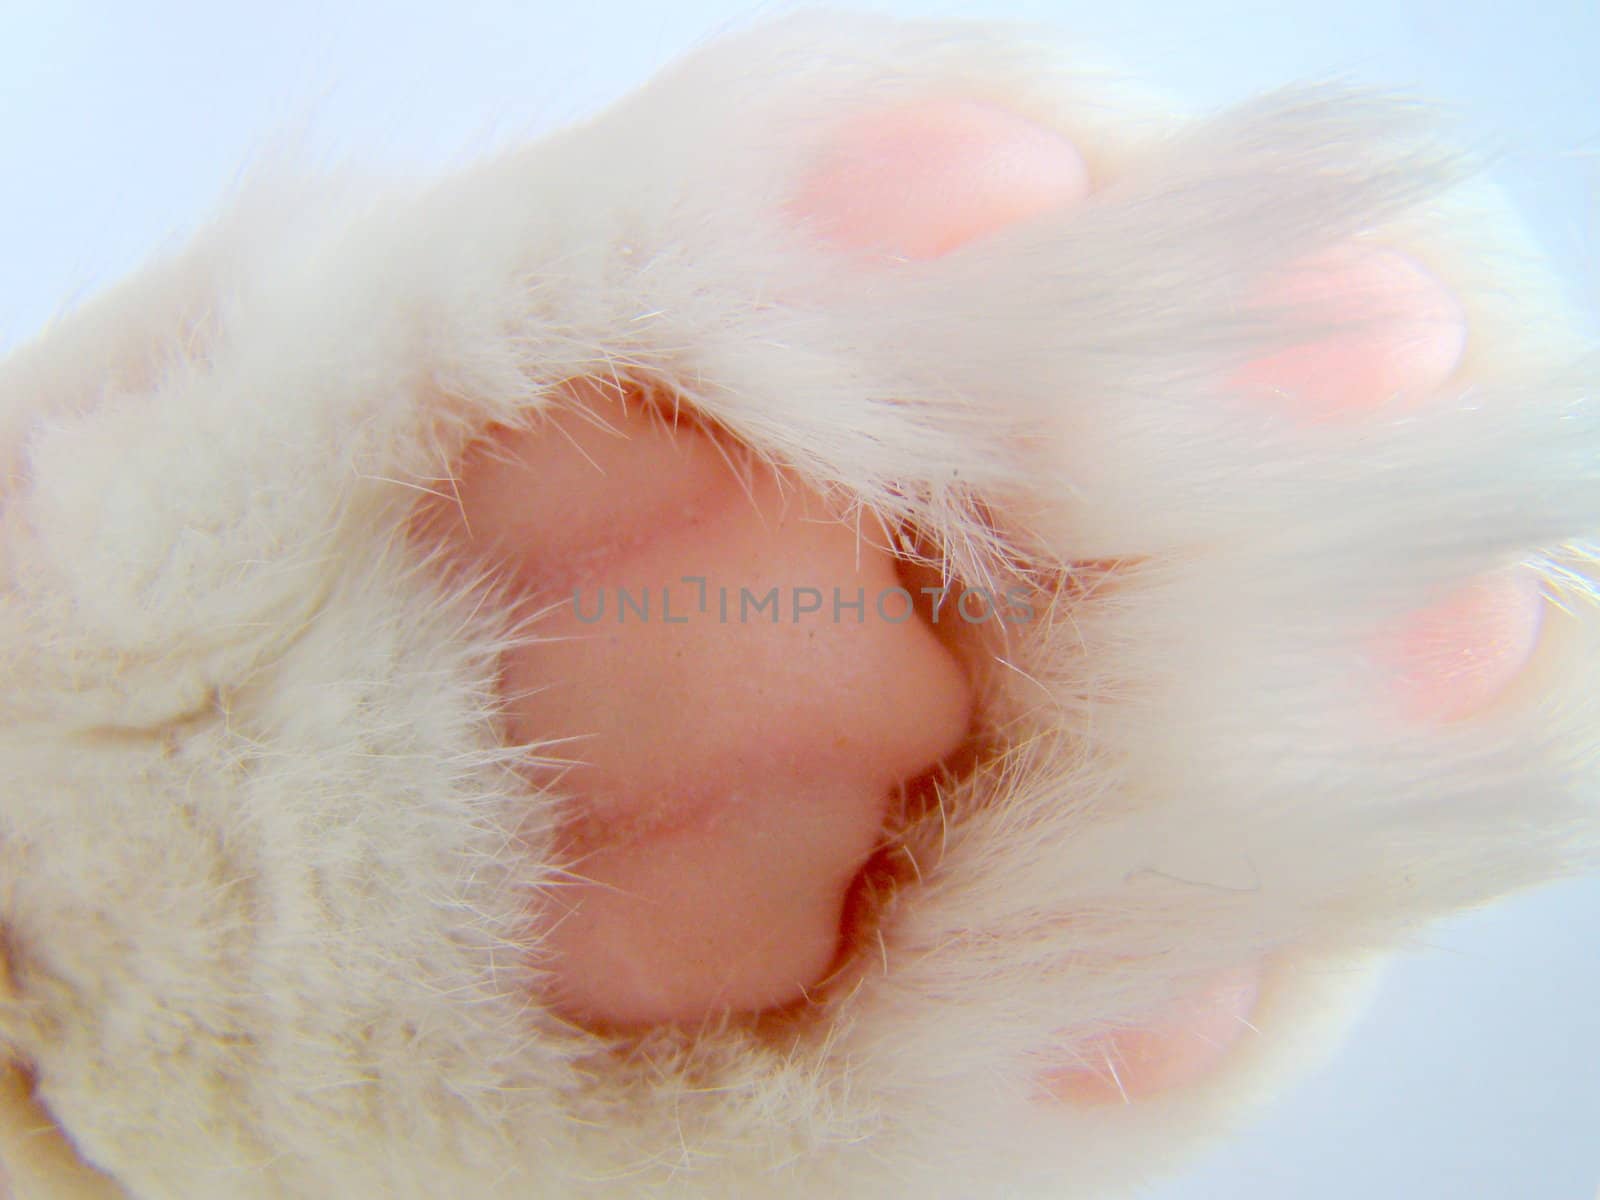 white cats paw up close